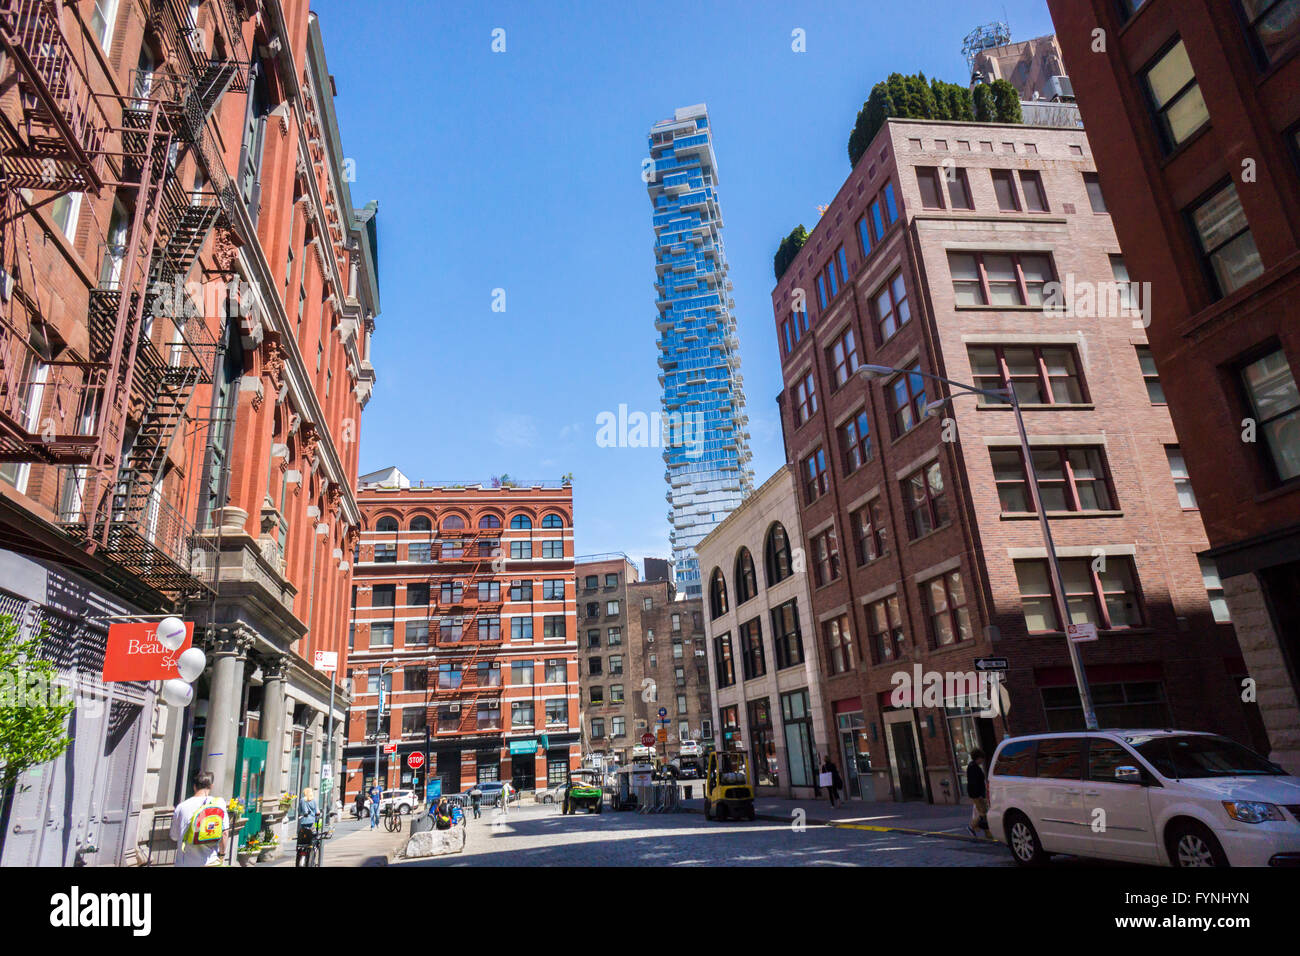 The condo skyscraper at 56 Leonard Street looms over older buildings in Tribeca in New York on Saturday, April 23, 2016. Designed by Herzog & de Meuron the condo is 820 feet high with 145 apartments, many already in contract. (© Richard B. Levine) Stock Photo